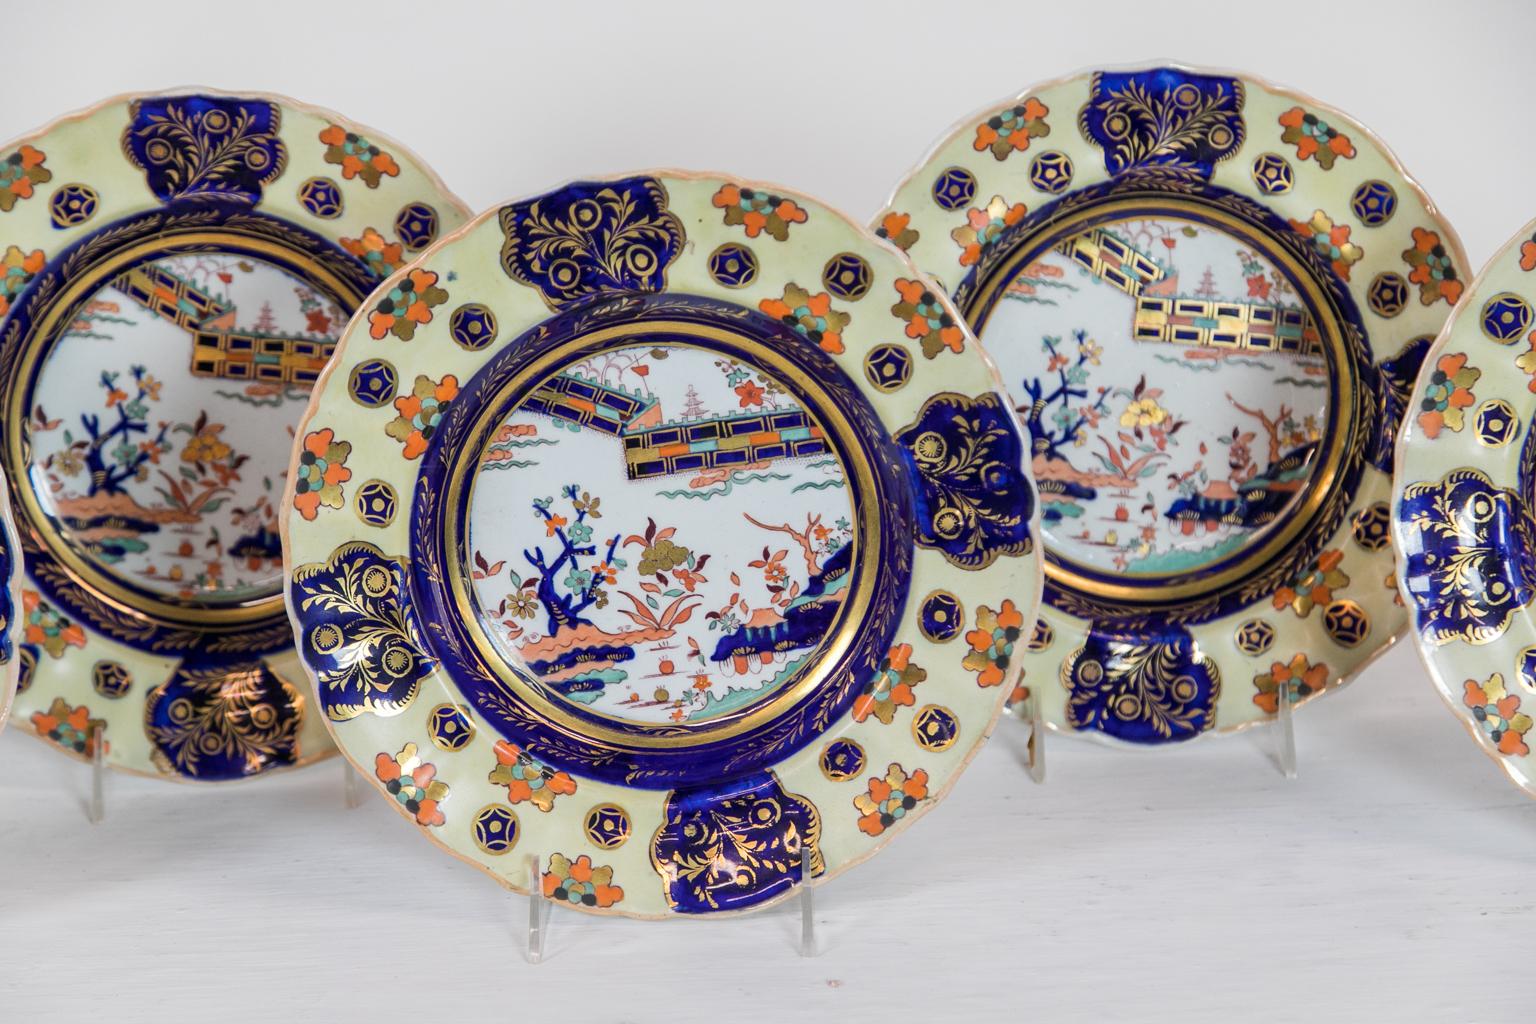 These soup plates have scalloped edges that frame a border with a rare yellow background containing stylized leaf clusters and round star lozenges interspersed with four cobalt cartouches of gilt leaves. The center panel has a fence pattern and a